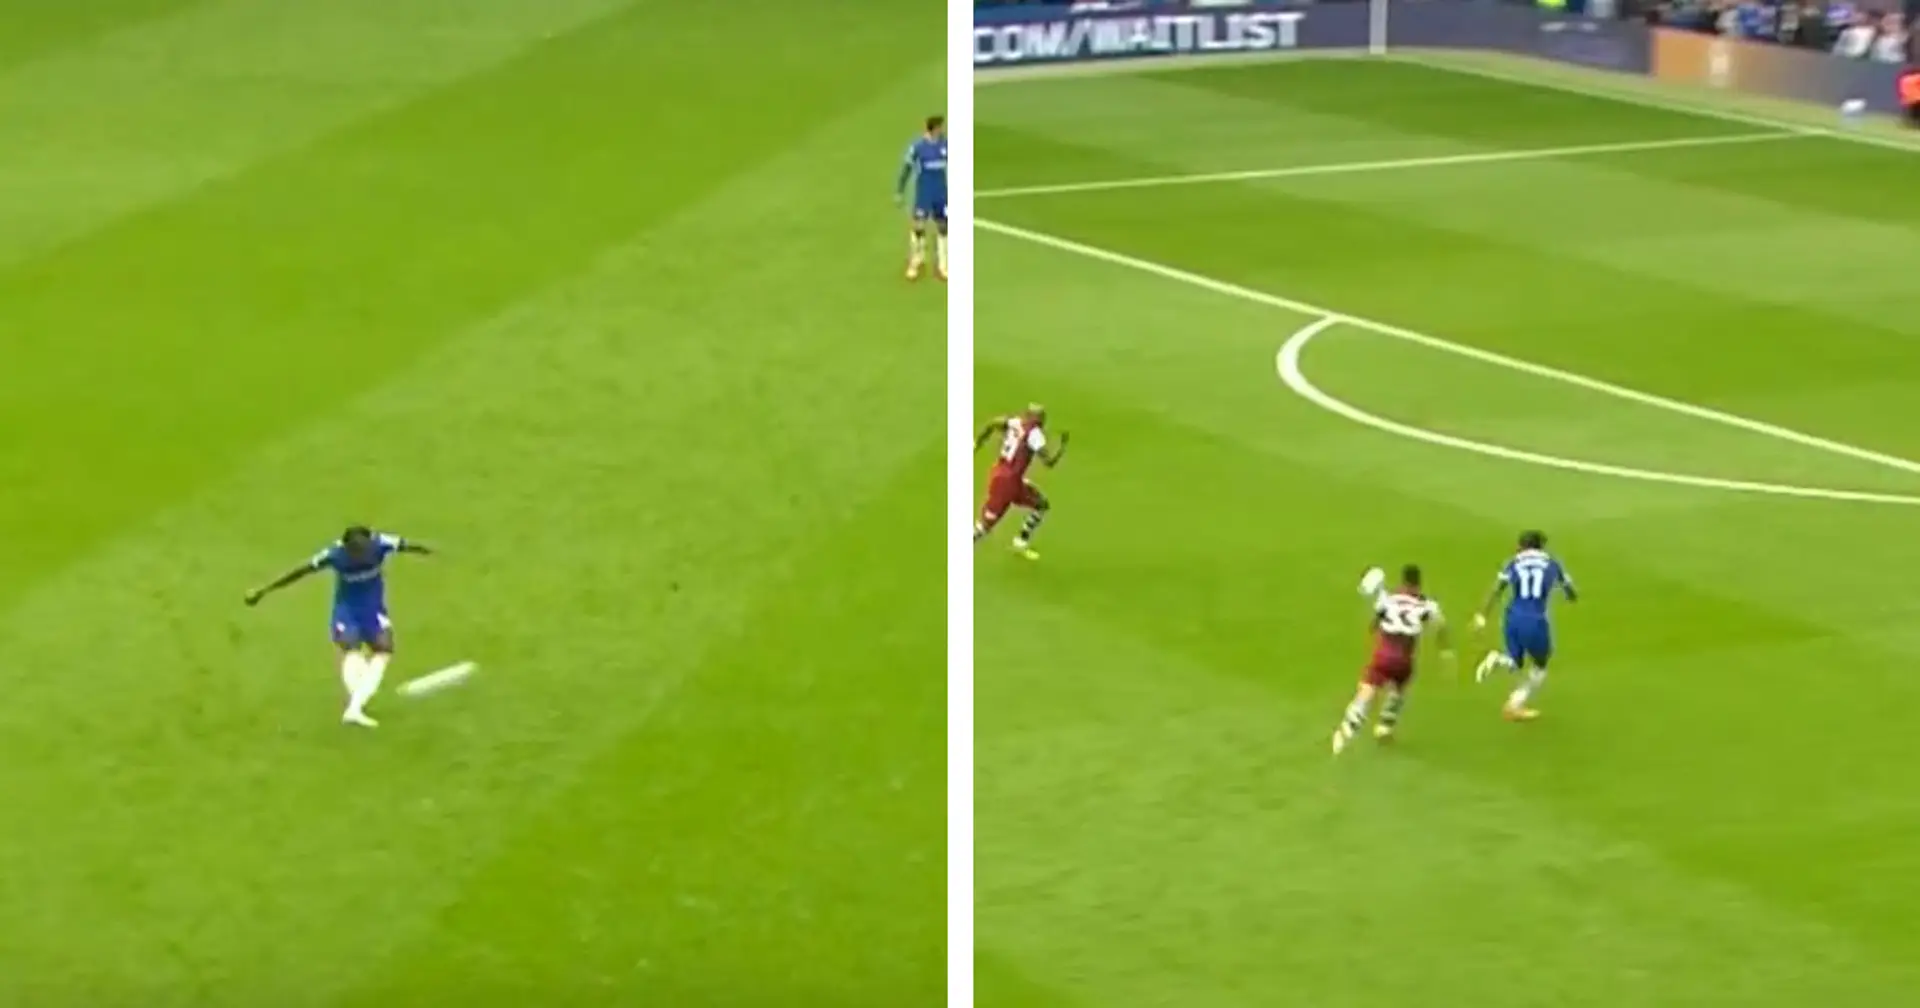 'Prime David Luiz-type pass': Chelsea fans pour praise on one player for creating Jackson goal — not just Madueke